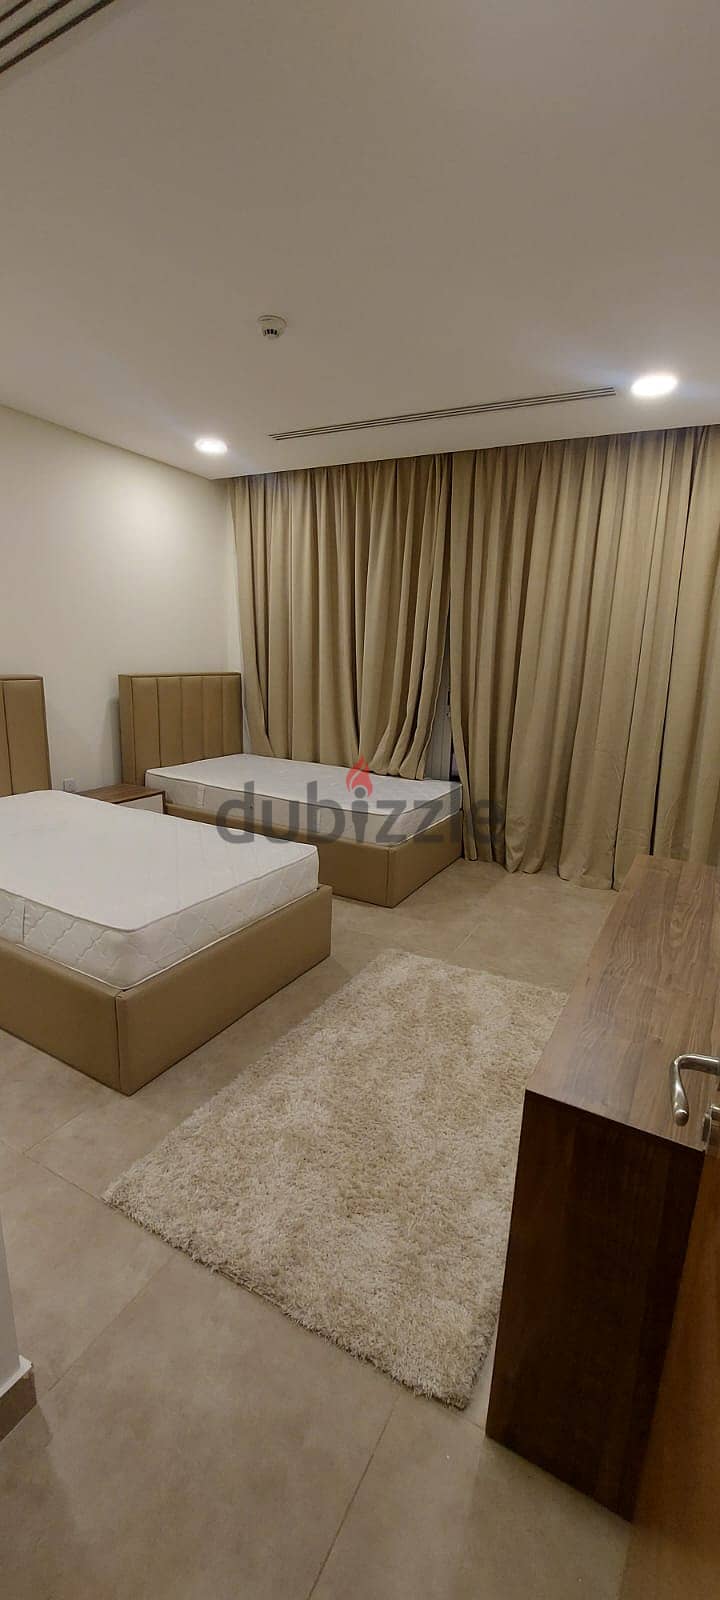 For sale apartment 2BHK in Erkyah City, Lusail City 11